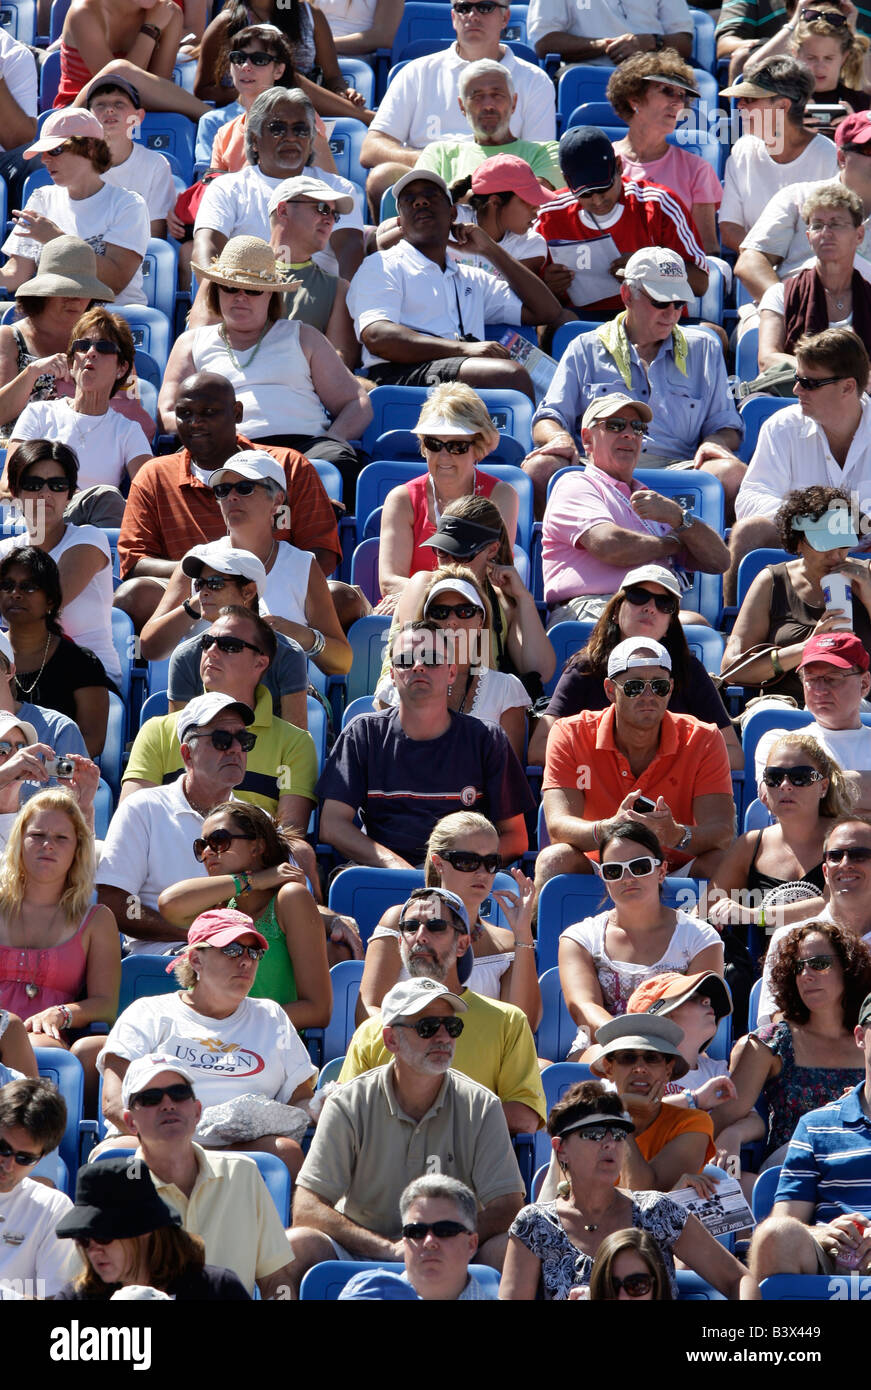 Crowd of spectators at the US Open Tennis tournament Stock Photo - Alamy